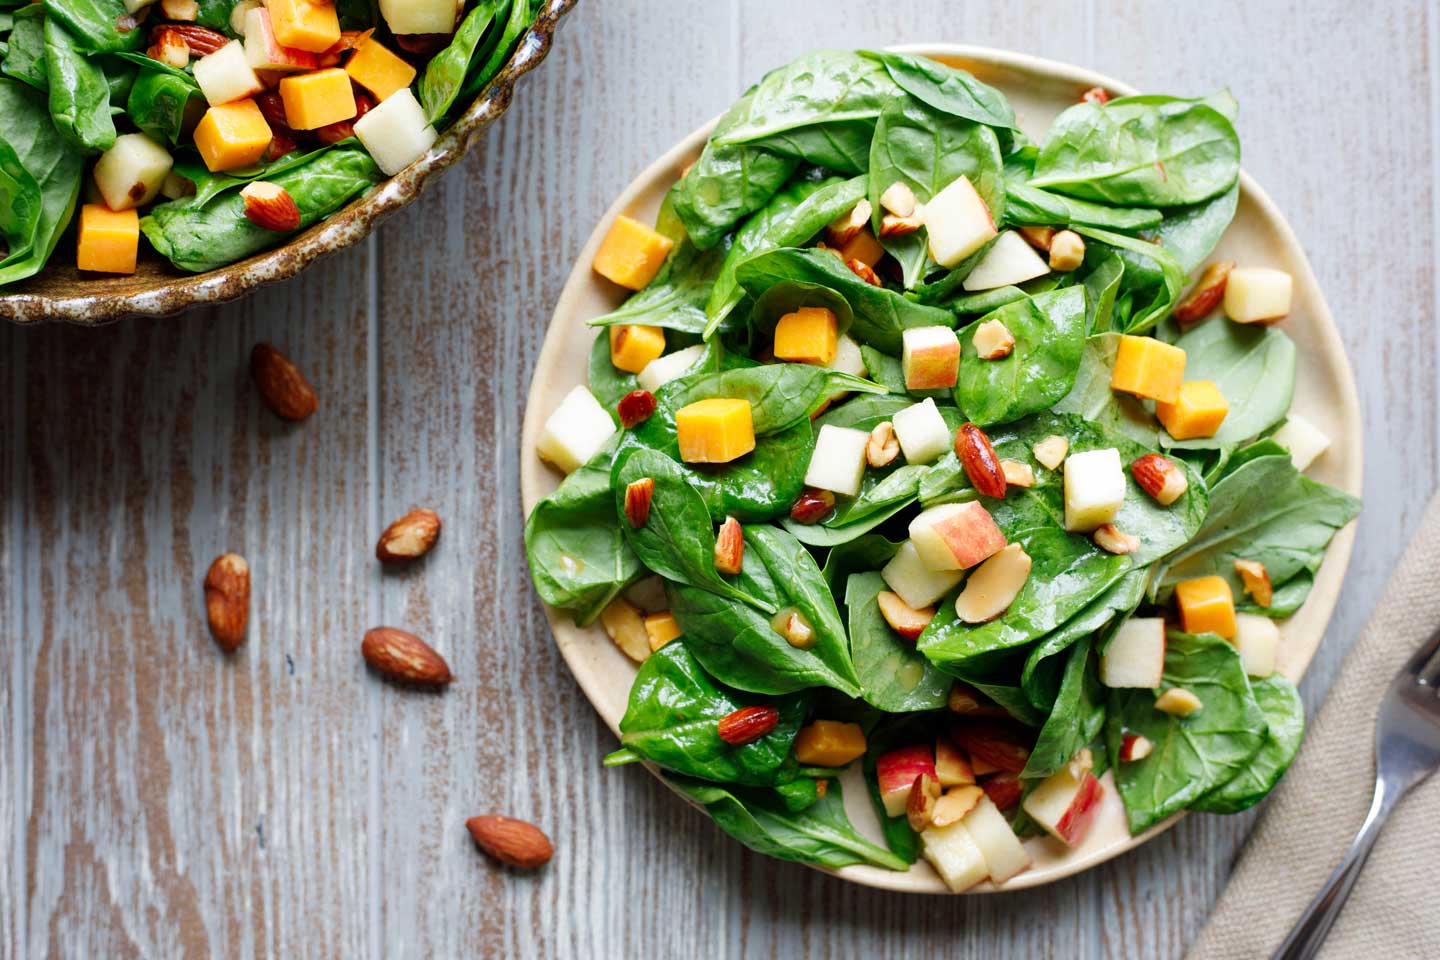 Spinach Salad with Apple, Cheddar and Smoked Almonds Recipe